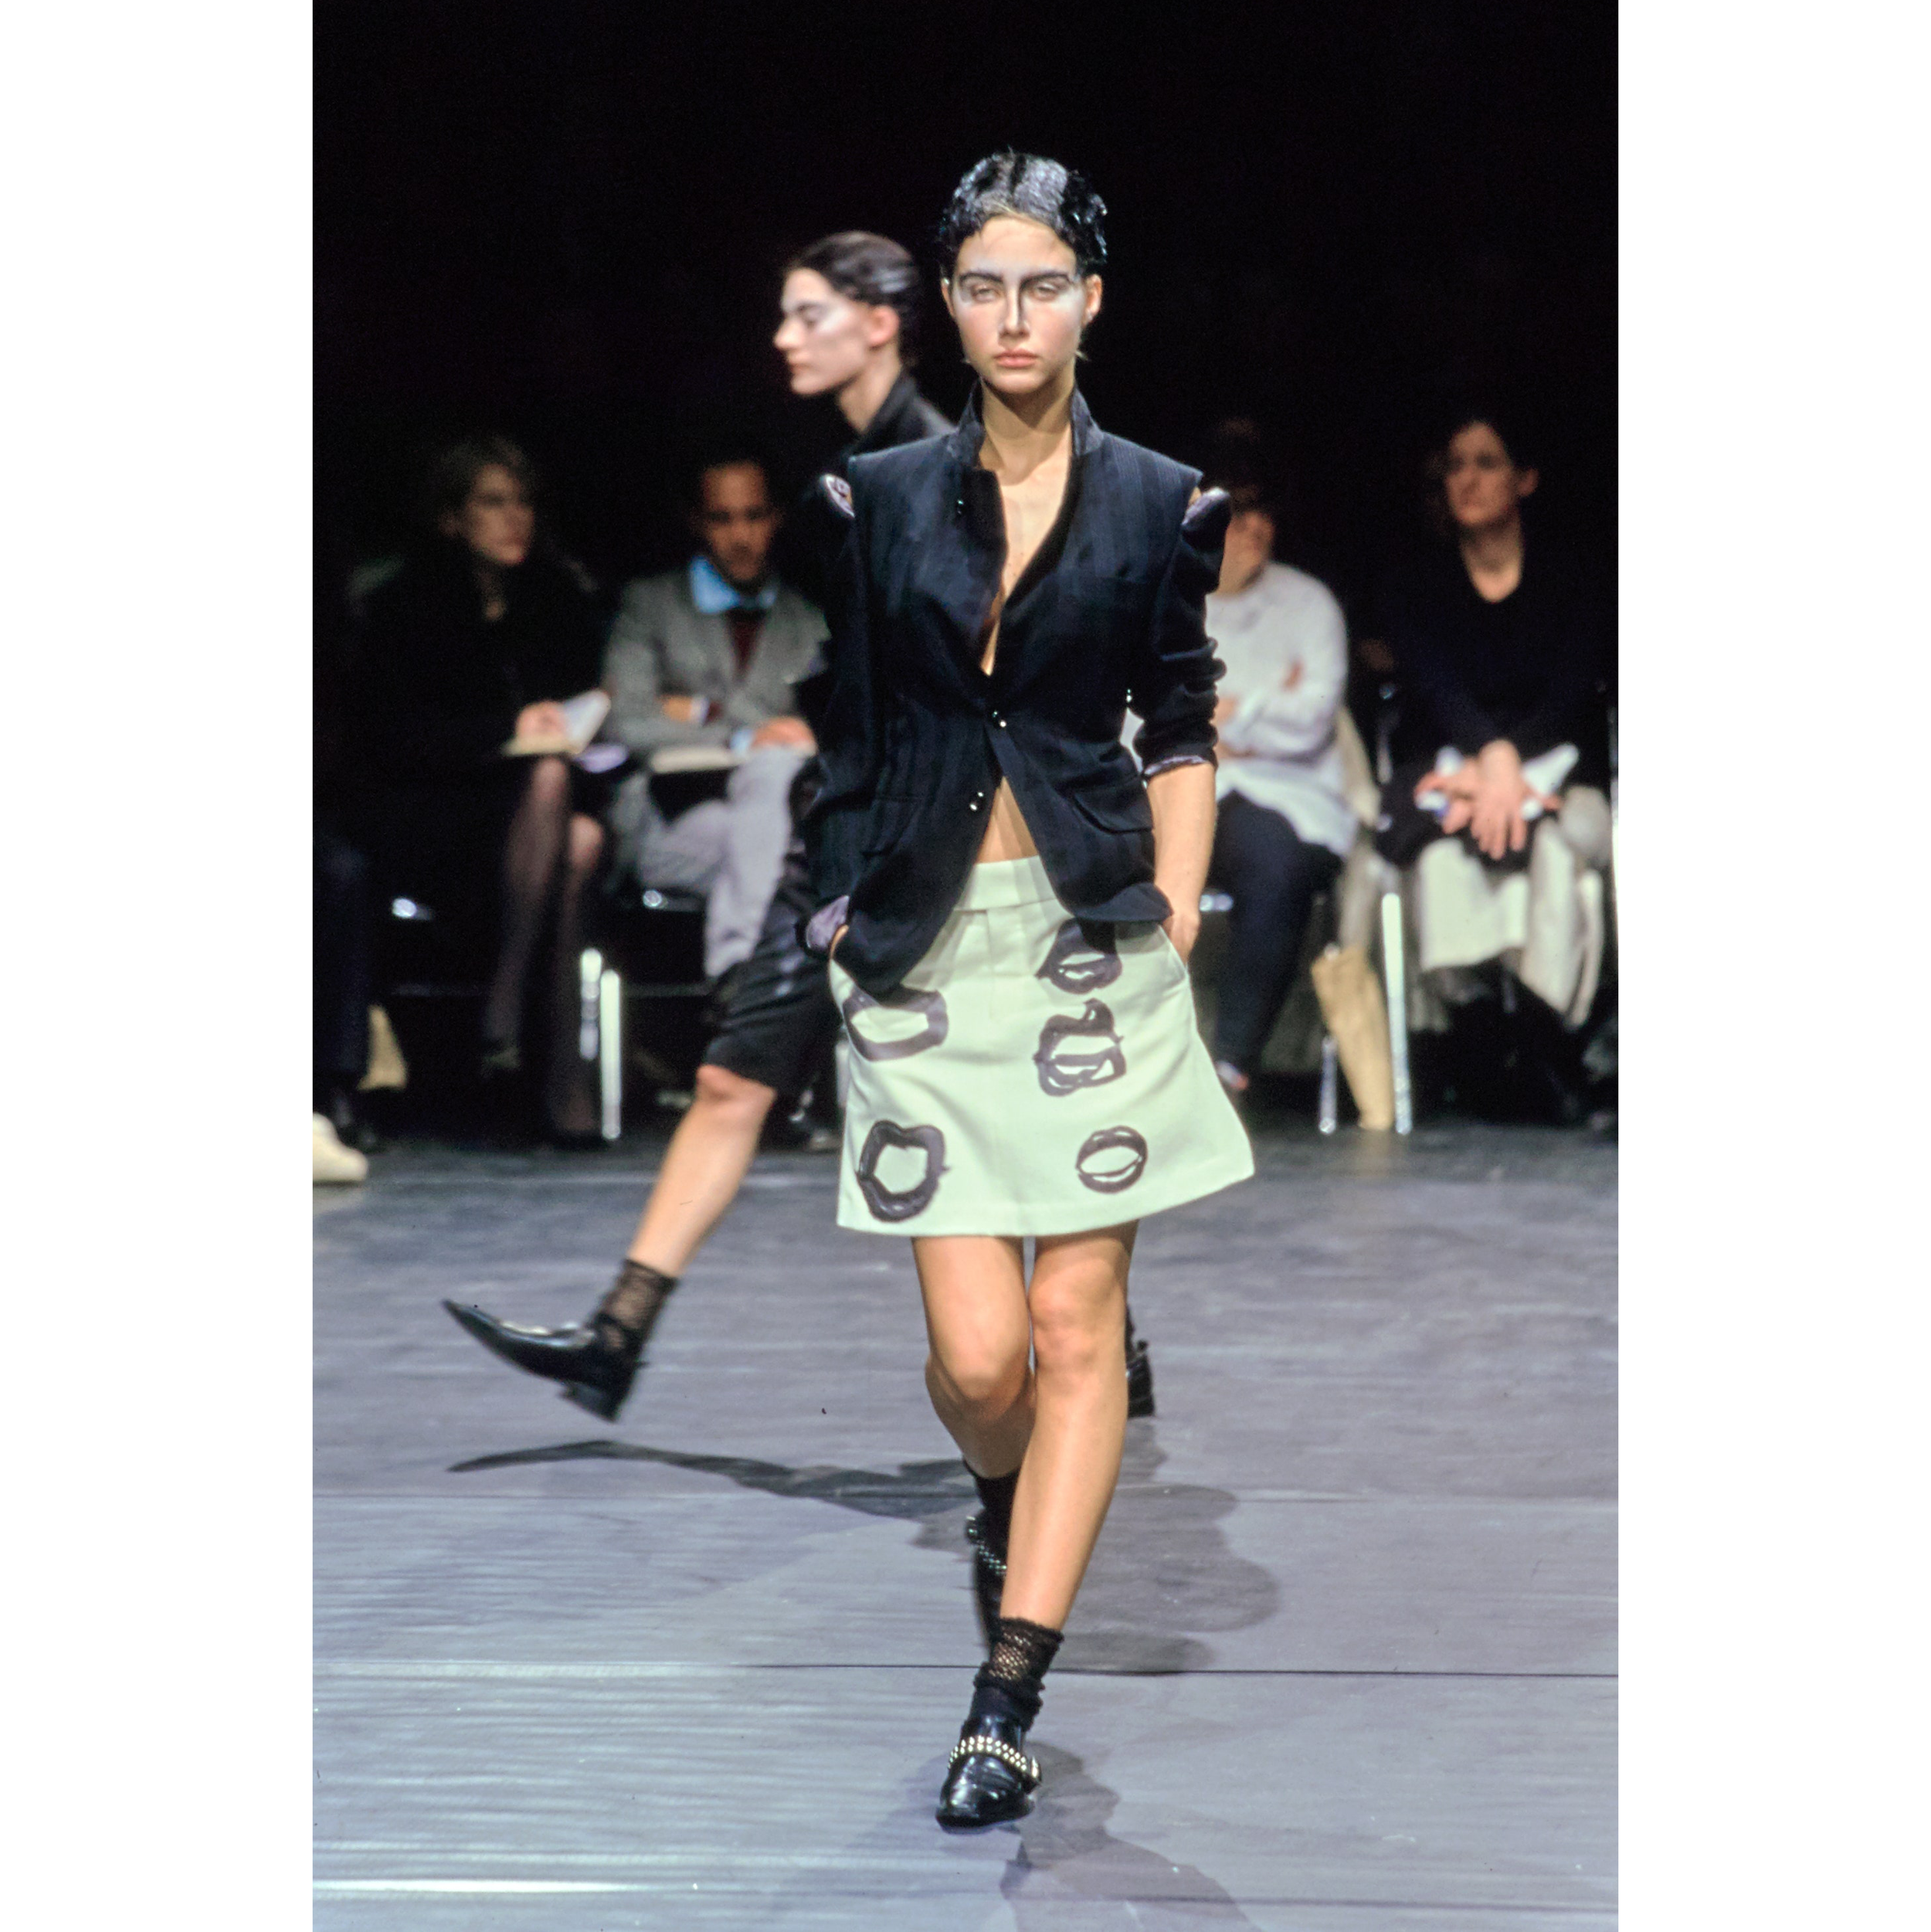 COMME-DES-GARCONS-FALL-2000-RTW-57-ANA-CLAUDIA-MICHELS-CN10042397.png